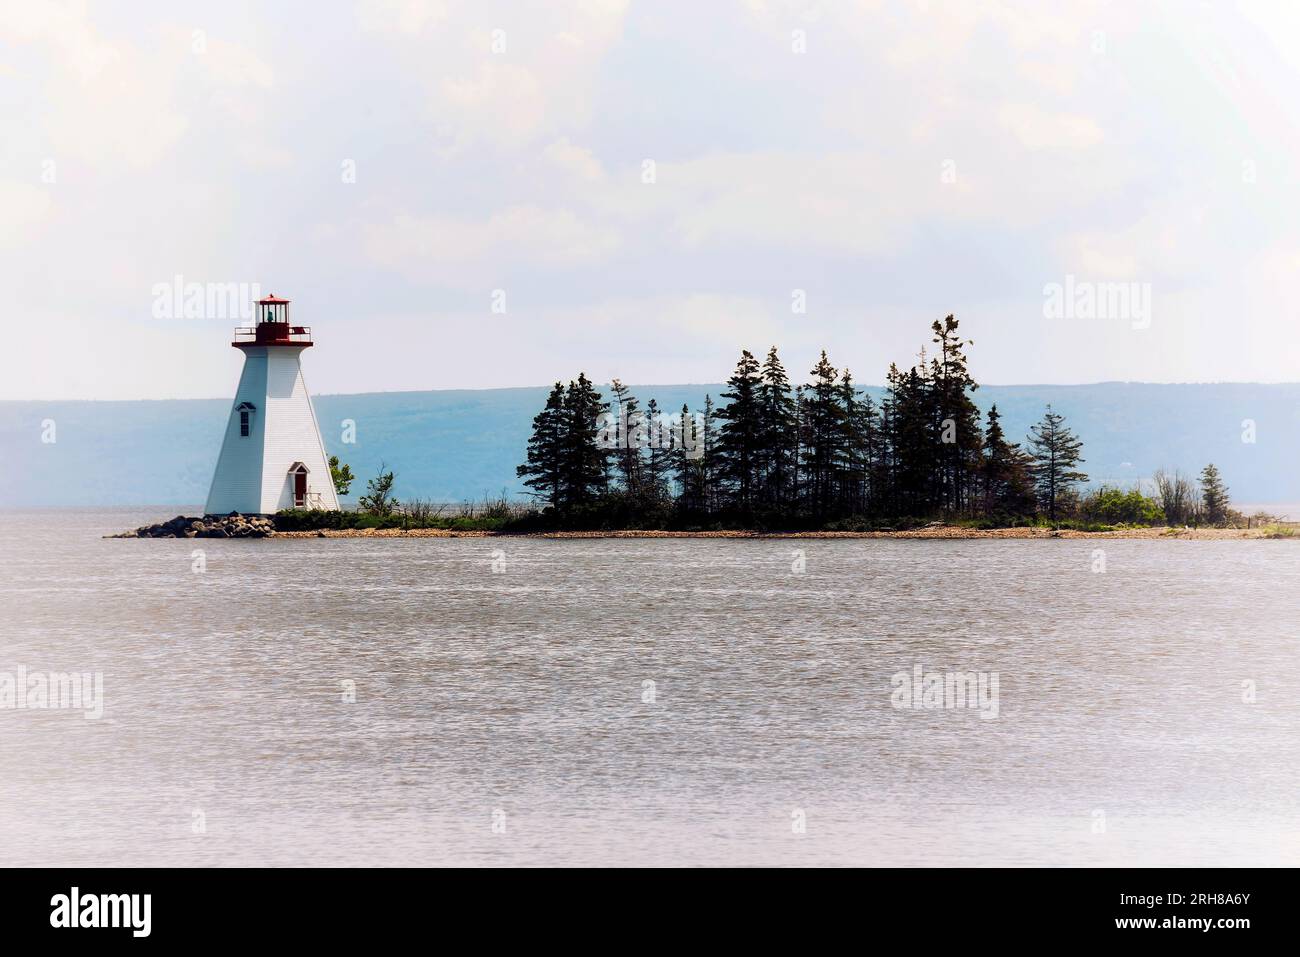 Artistic, atmospheric shot of lighthouse and row of trees in daylight Stock Photo